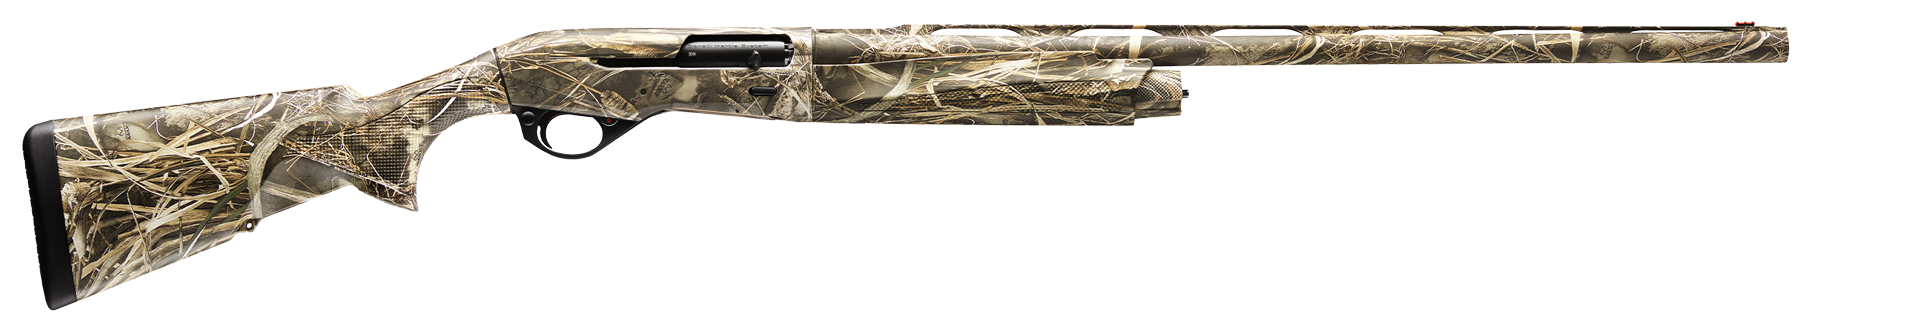 benelli-m2-max-7.png